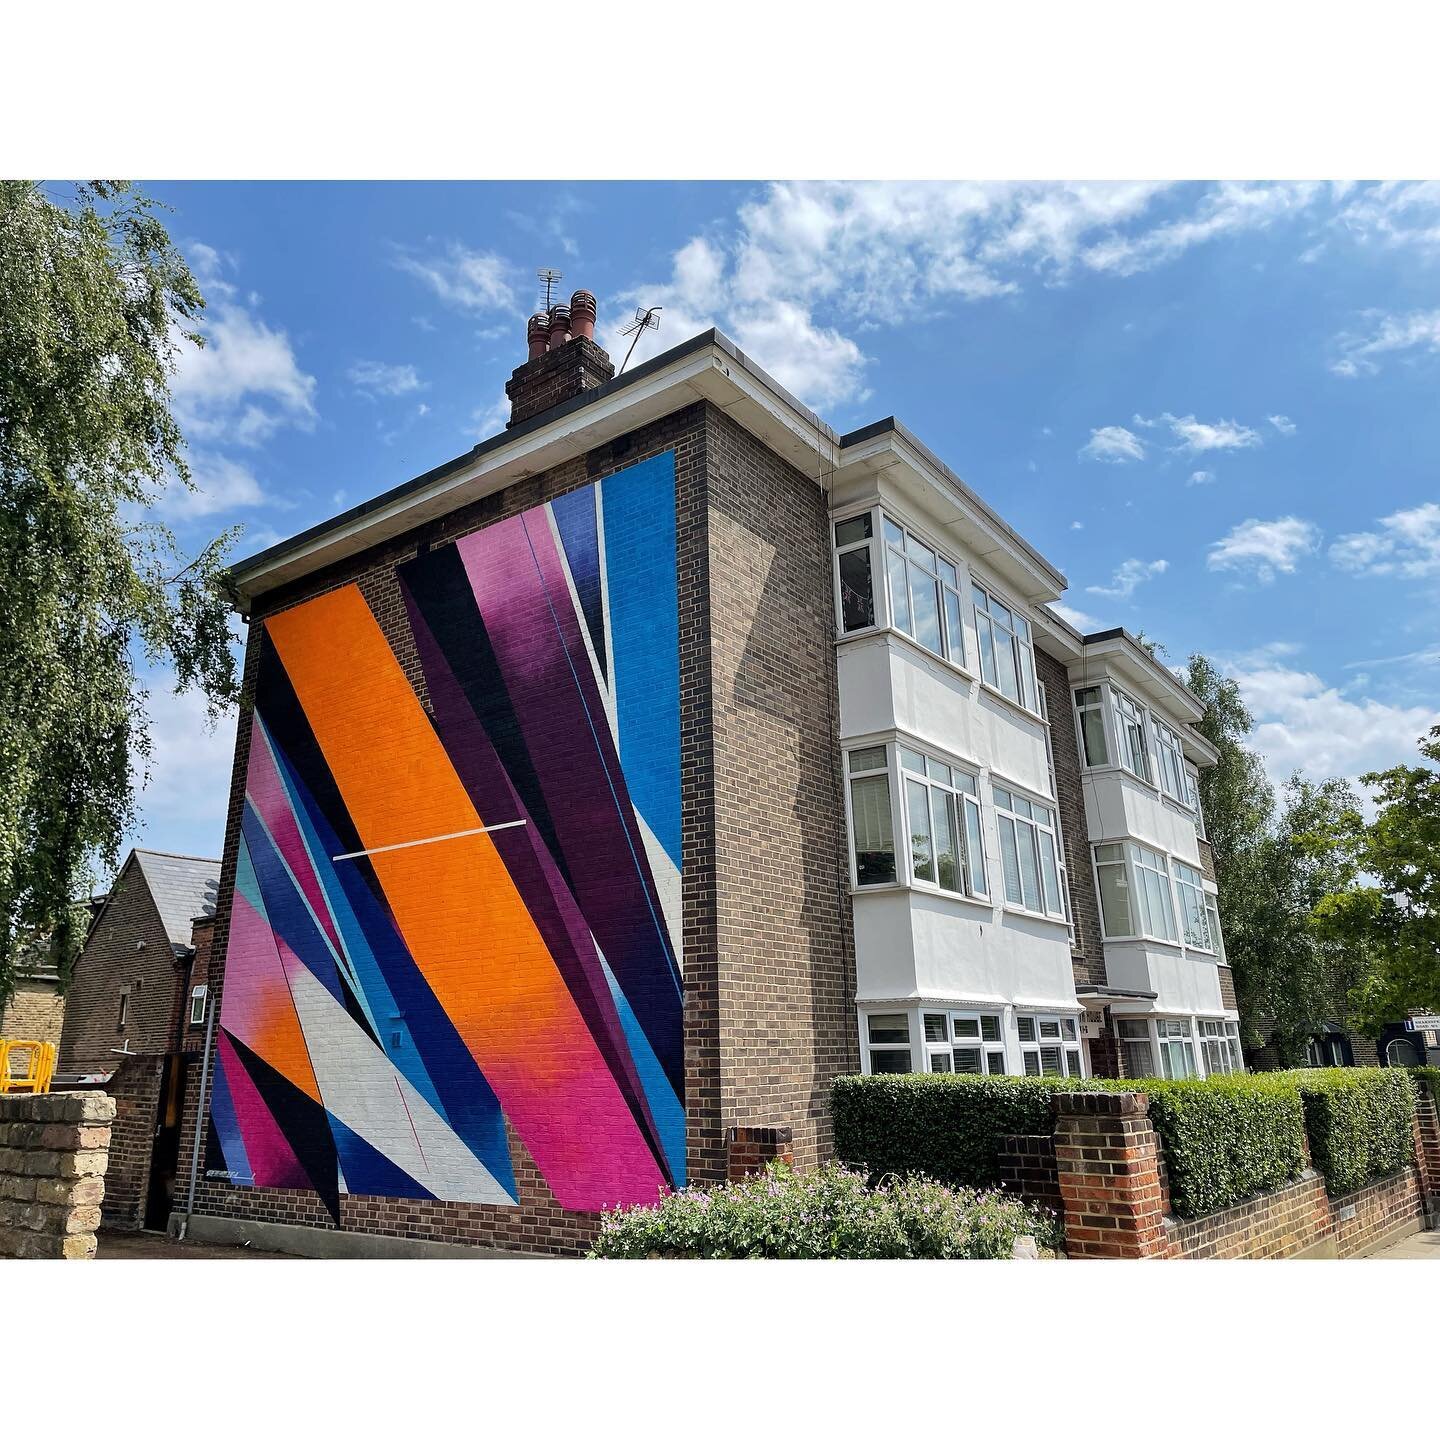 New mural by @remirough for @actonunframed &amp; @jgcontemporary in Acton, west London.